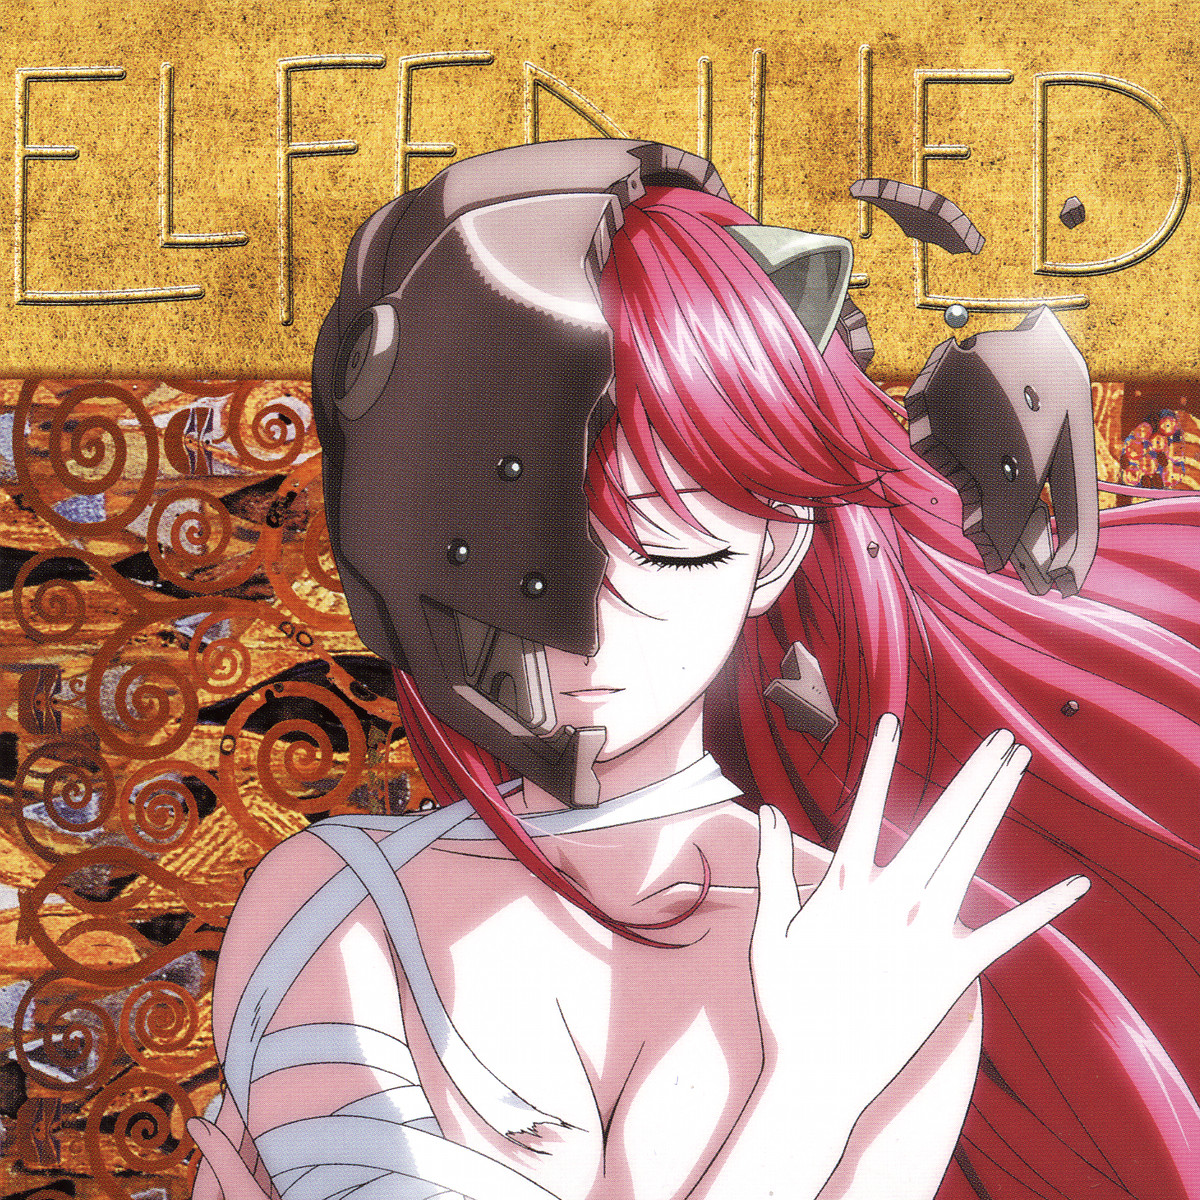 Elfen Lied (short review and impression) - Moonlight stories